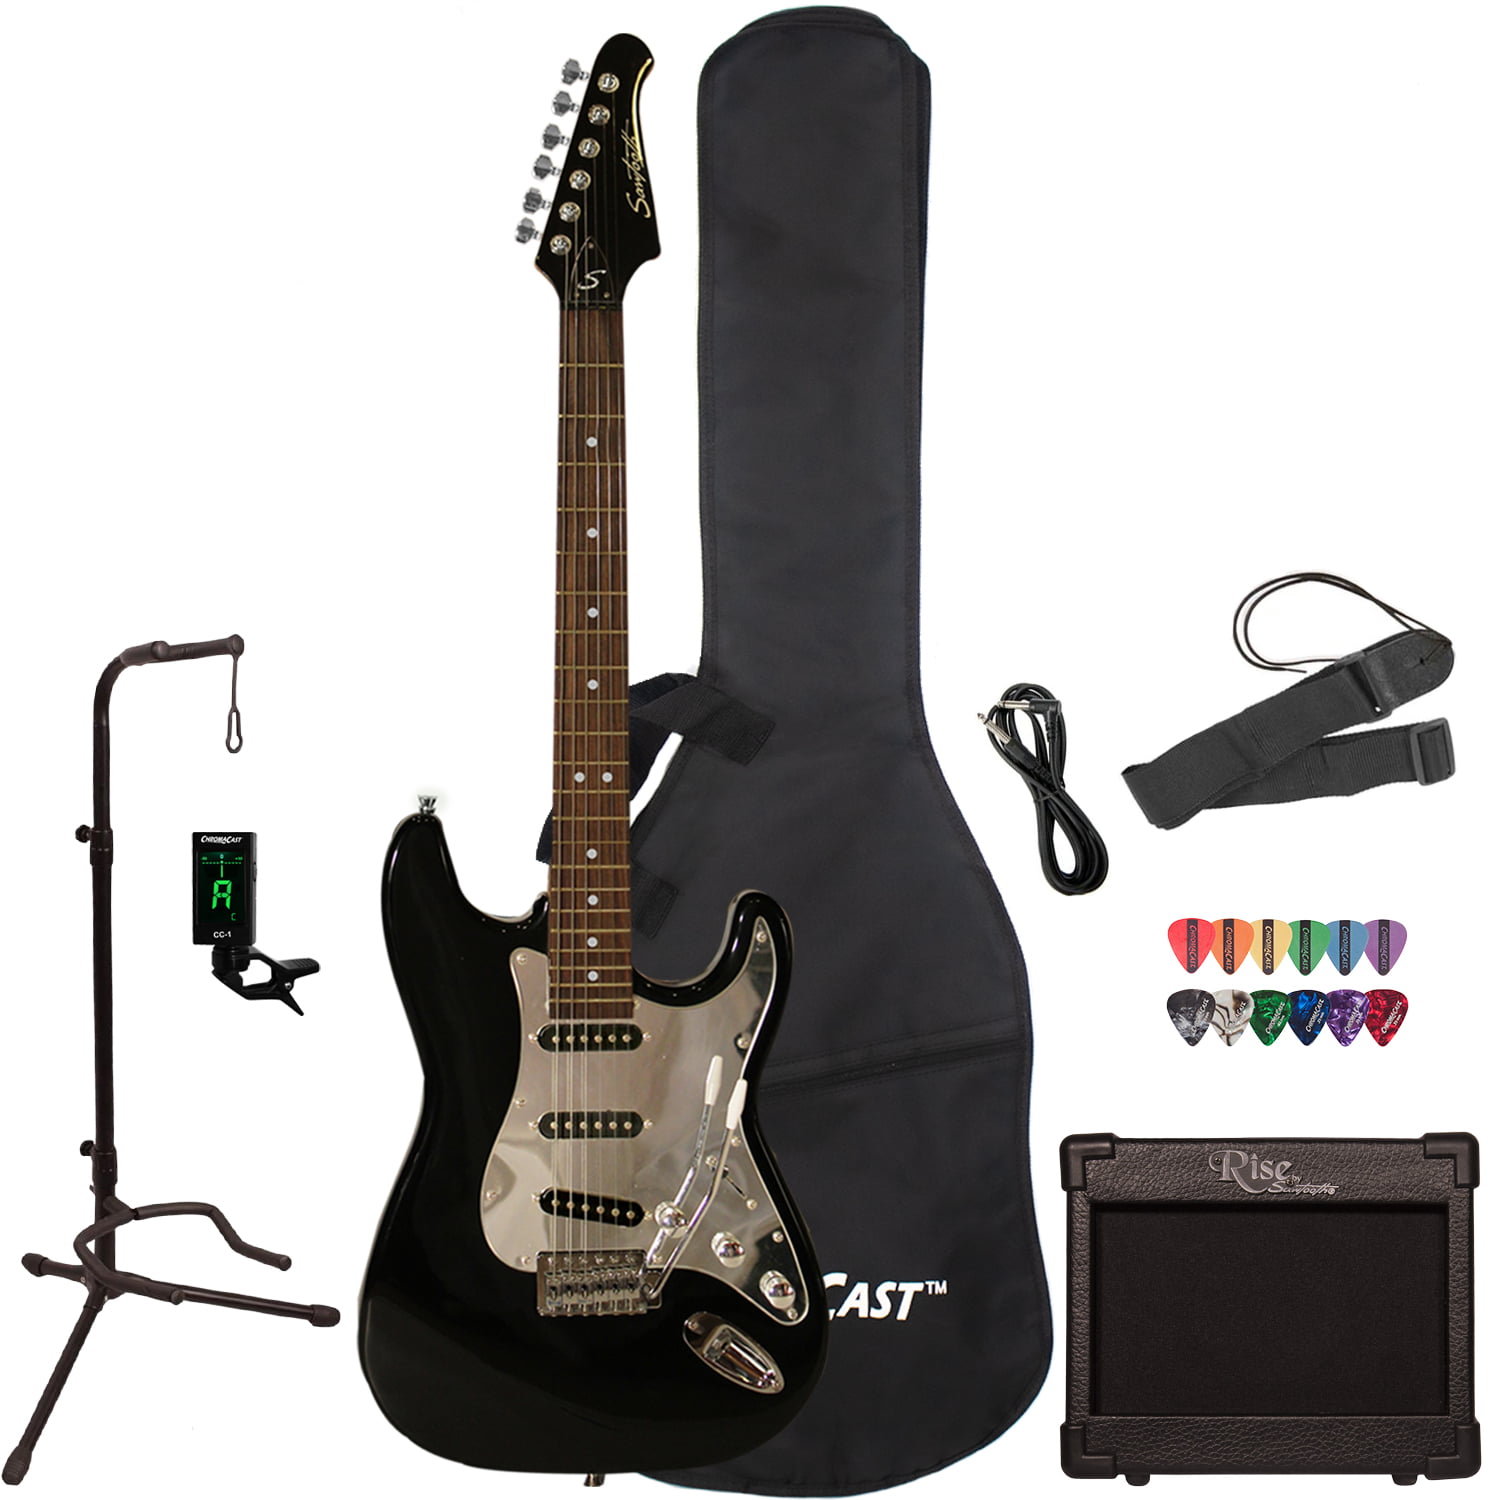 Sawtooth ST-AMP-10-KIT-1ST-AMP-10-KIT-1 10-Watt Electric Guitar Amp with Pro Series Cable and Pick Sampler &  Basics Guitar Folding A-Frame Stand for Acoustic and Electric Guitars 